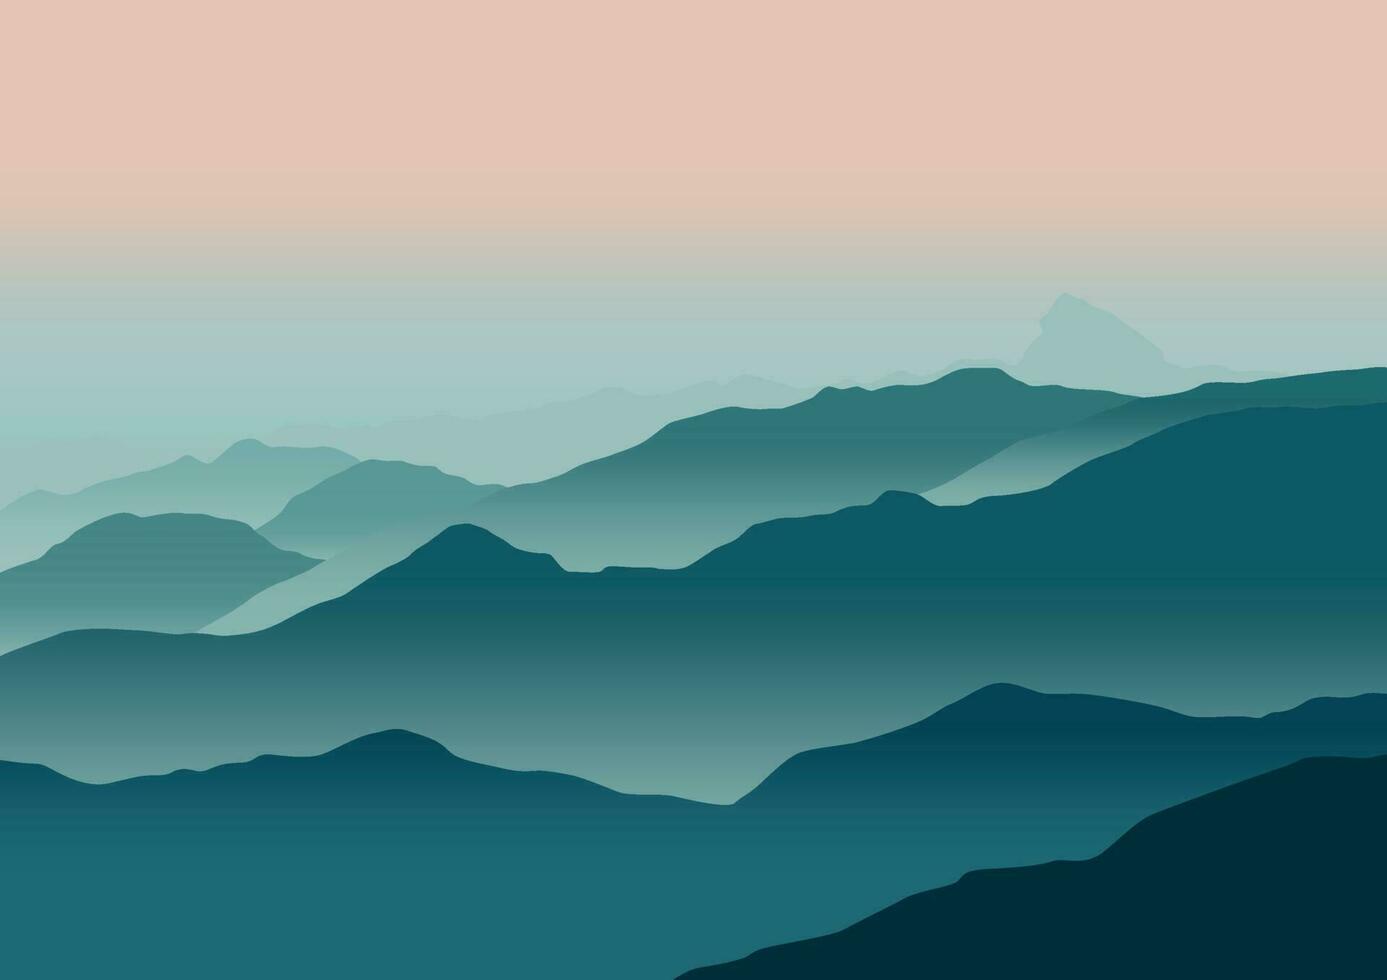 beautiful mountains landscape. Vector illustration in flat style.